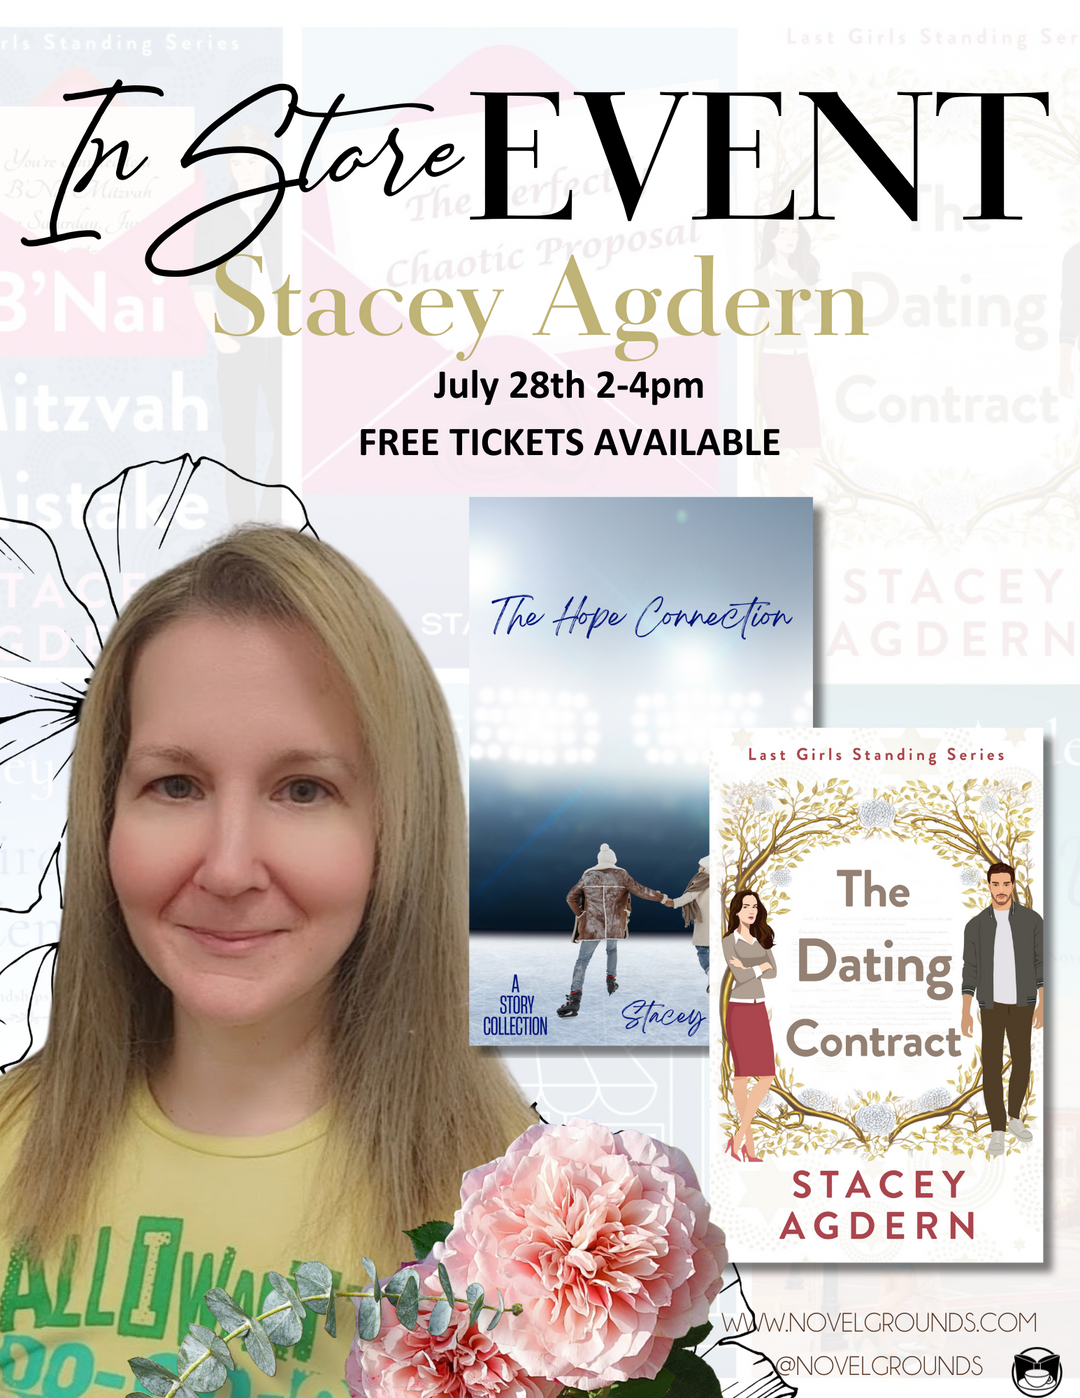 Stacey Adgern Signing Event Ticket - July 28th -2-4pm